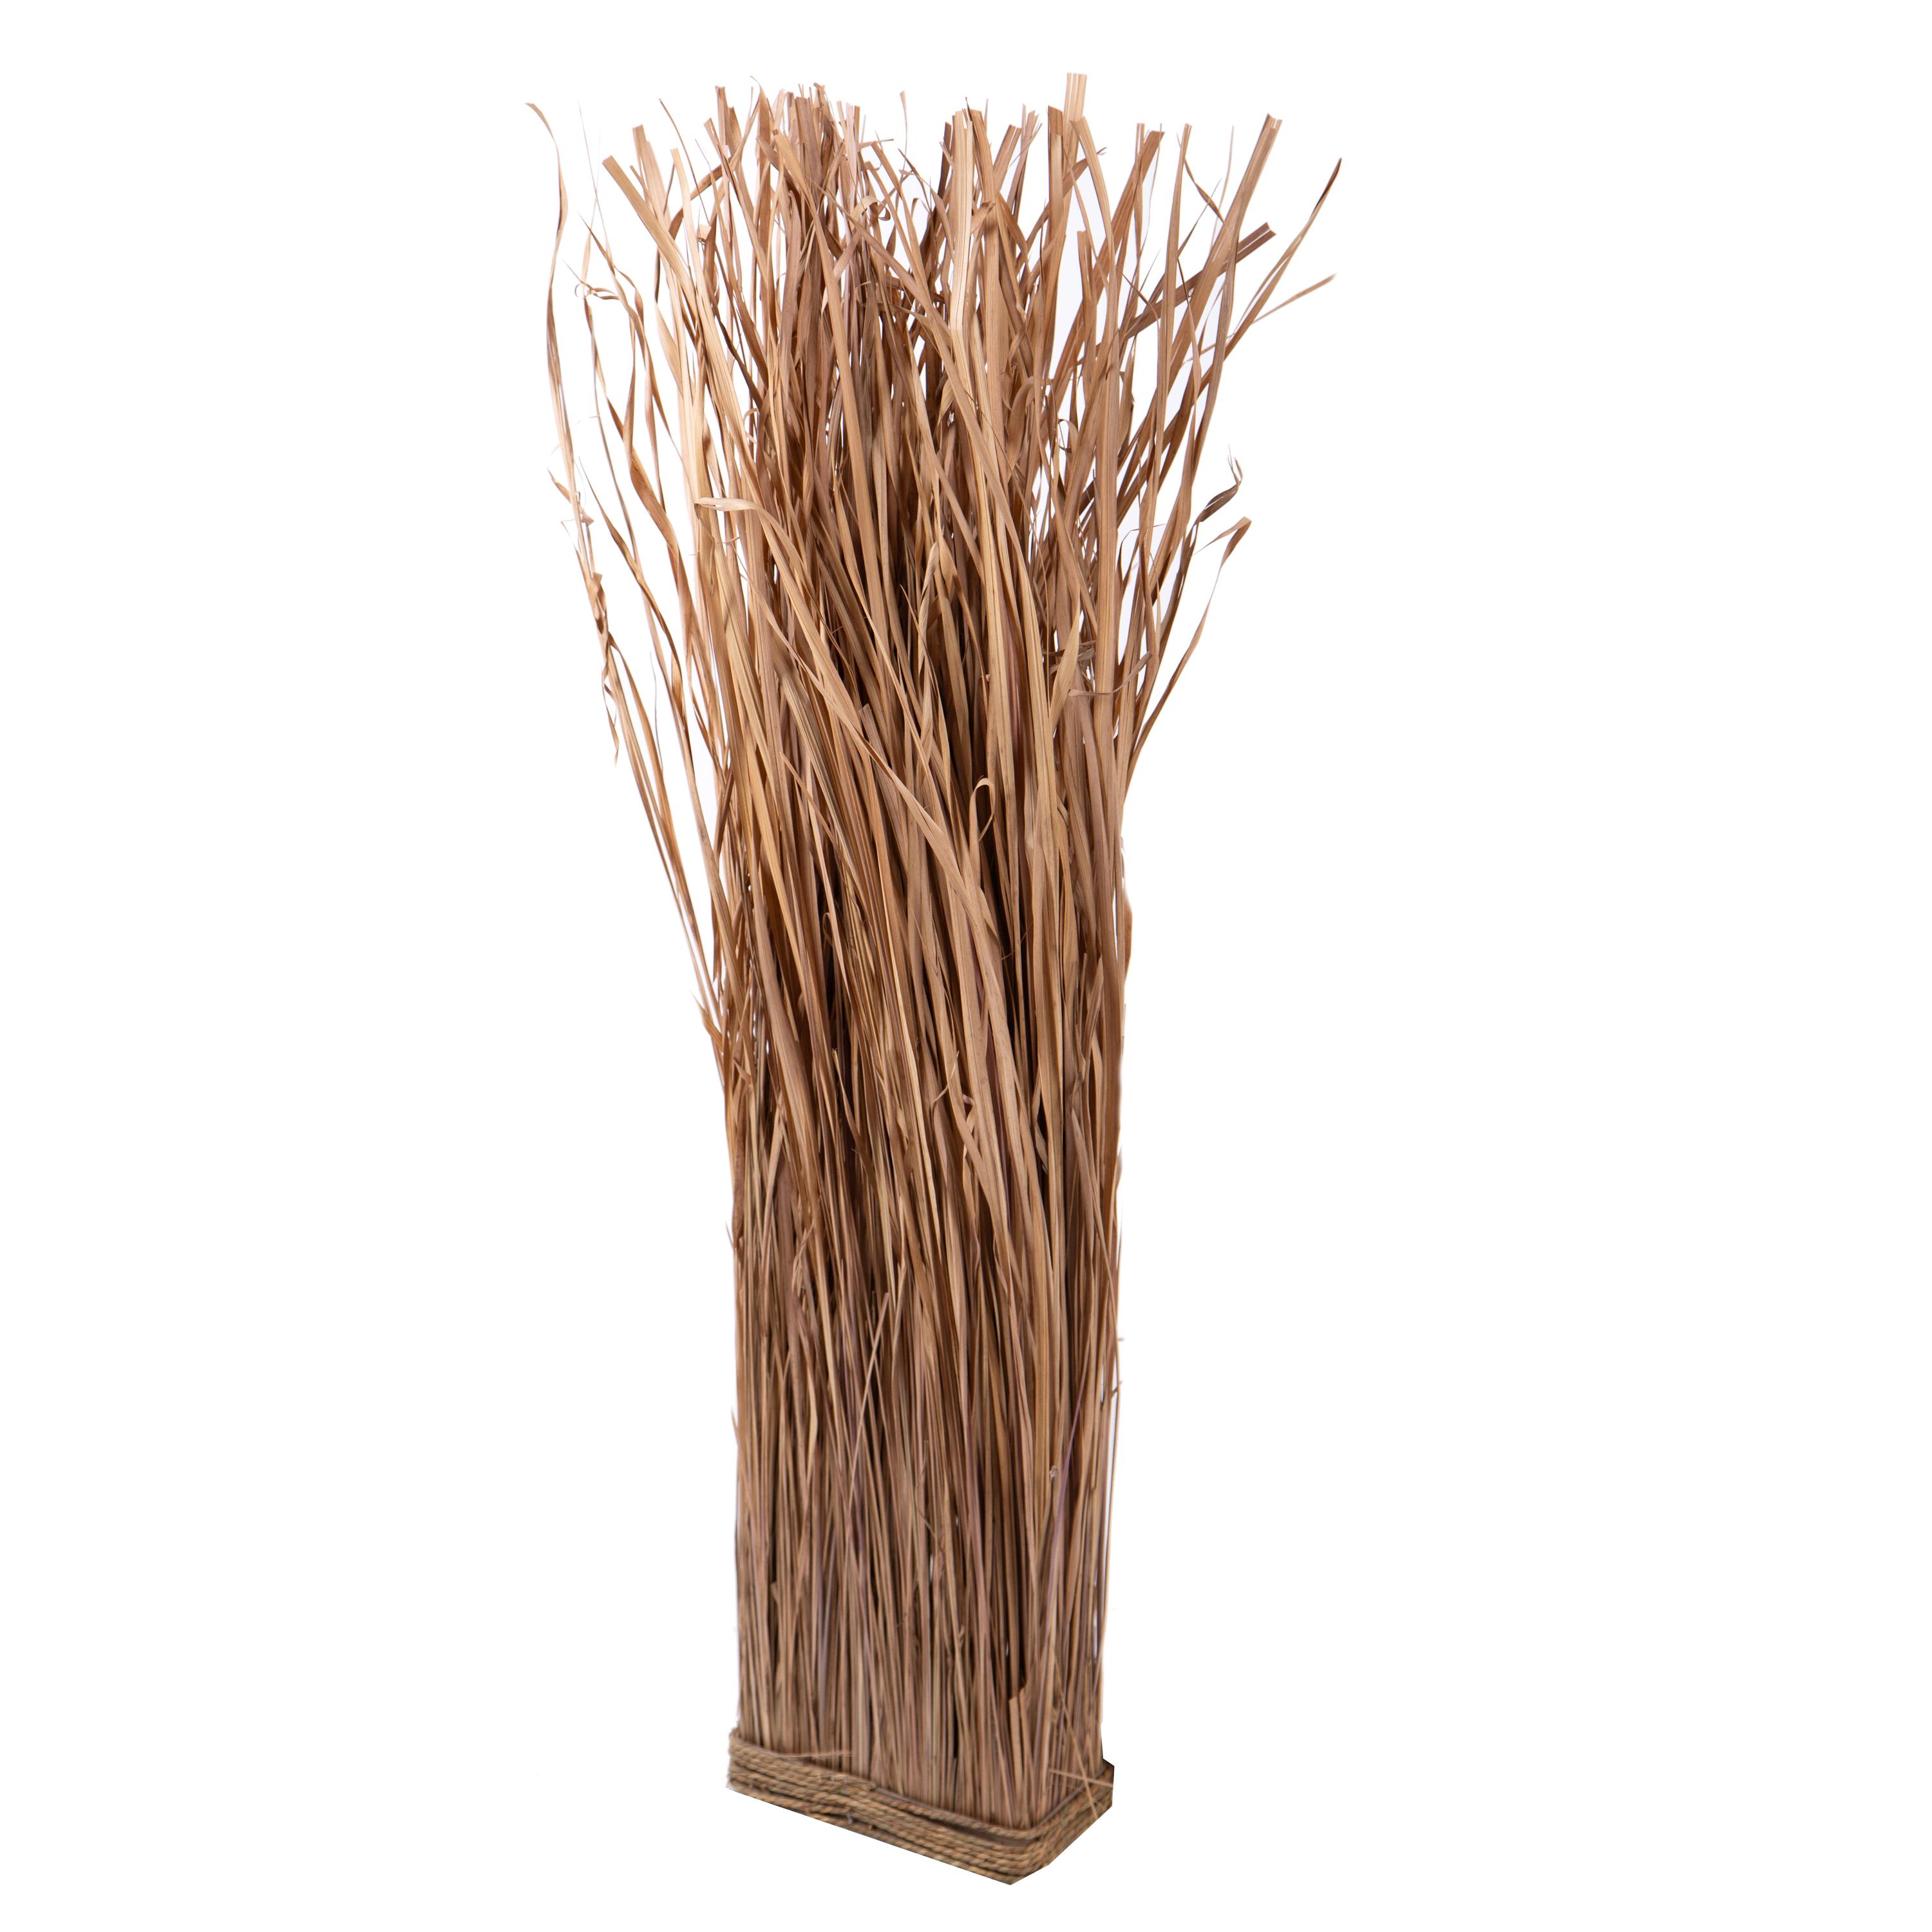 NATURAL PRODUCTS DRIED FLOWERS AND ERBS, BAMBOO,MANZANITE, TRUNKS, BANDS, NATURAL STRUCTURE, PARETE ERBA 24X12XH110 CM